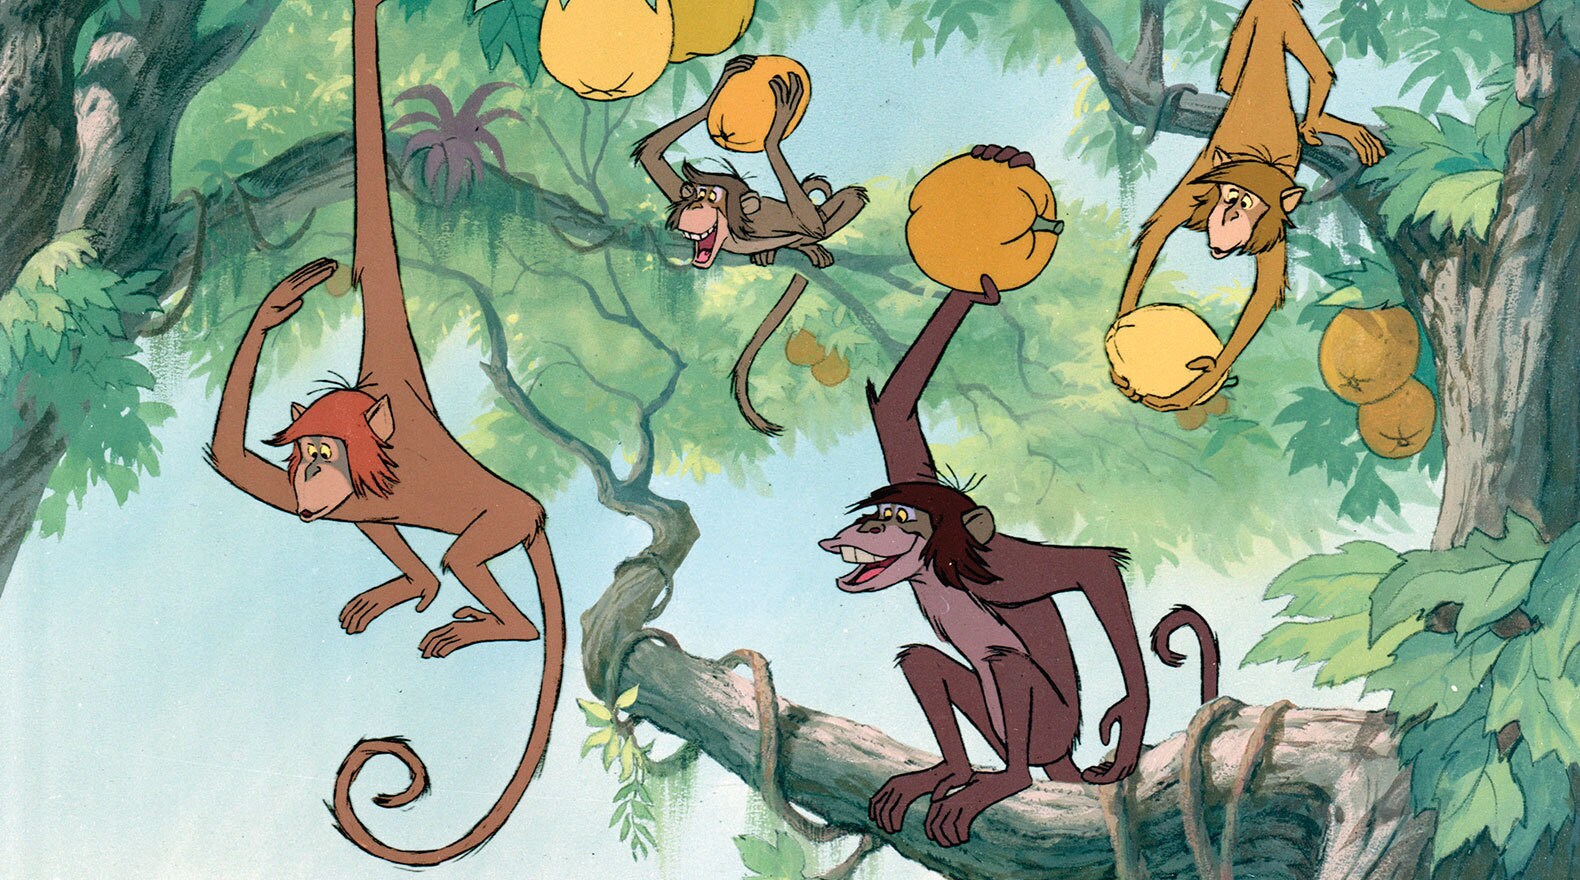 Monkeys throw fruit at Baloo (voice of Phil Harris) and create chaos from the Disney movie The Jungle Book (1967).